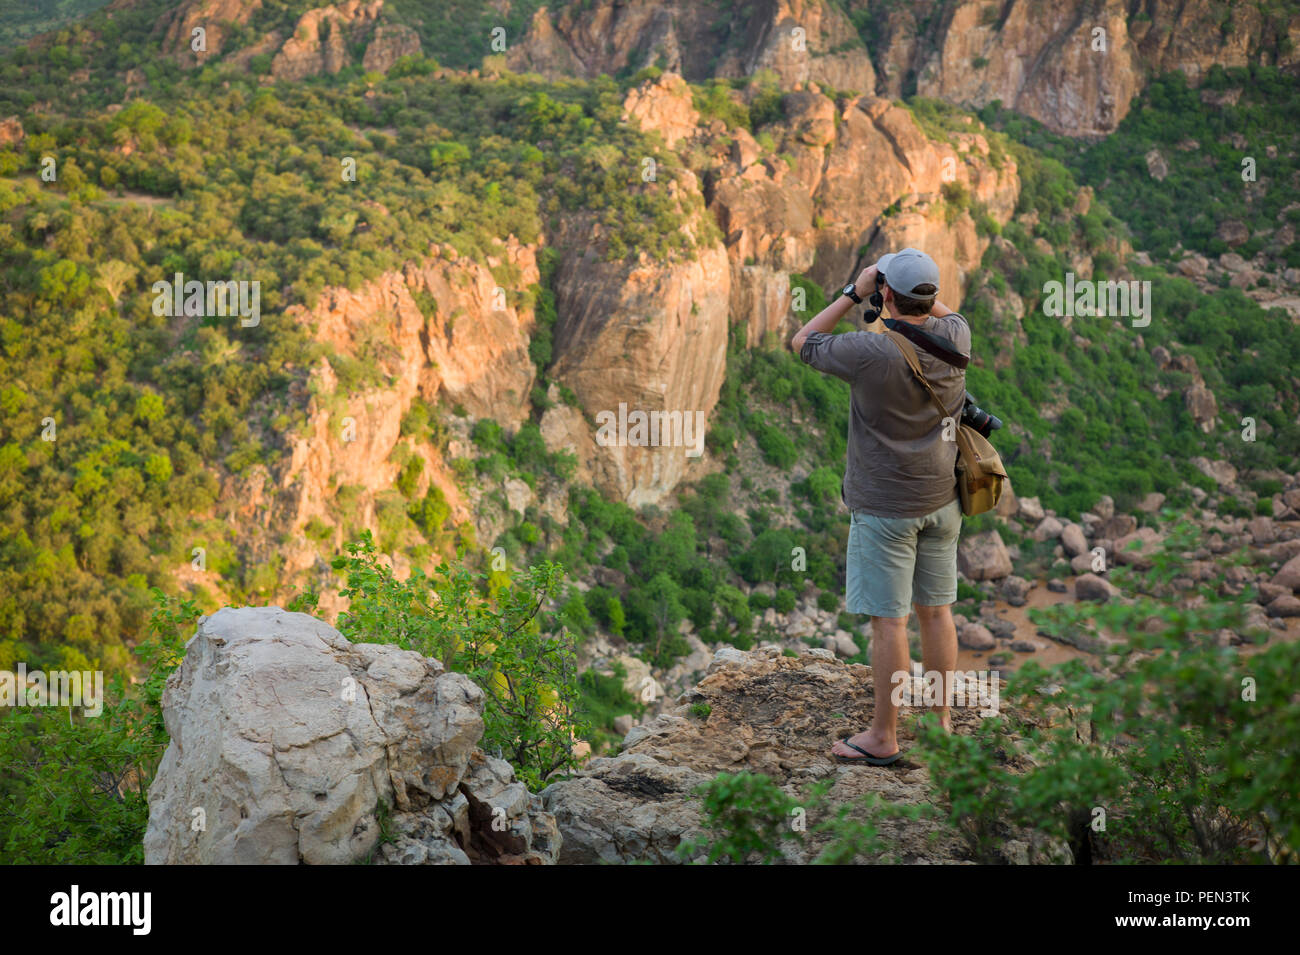 Young traveller looking over Lanner Gorge, carved by the Luvuvhu River, in the Pafuri region in the far north of Kruger National Park, South Africa. Stock Photo